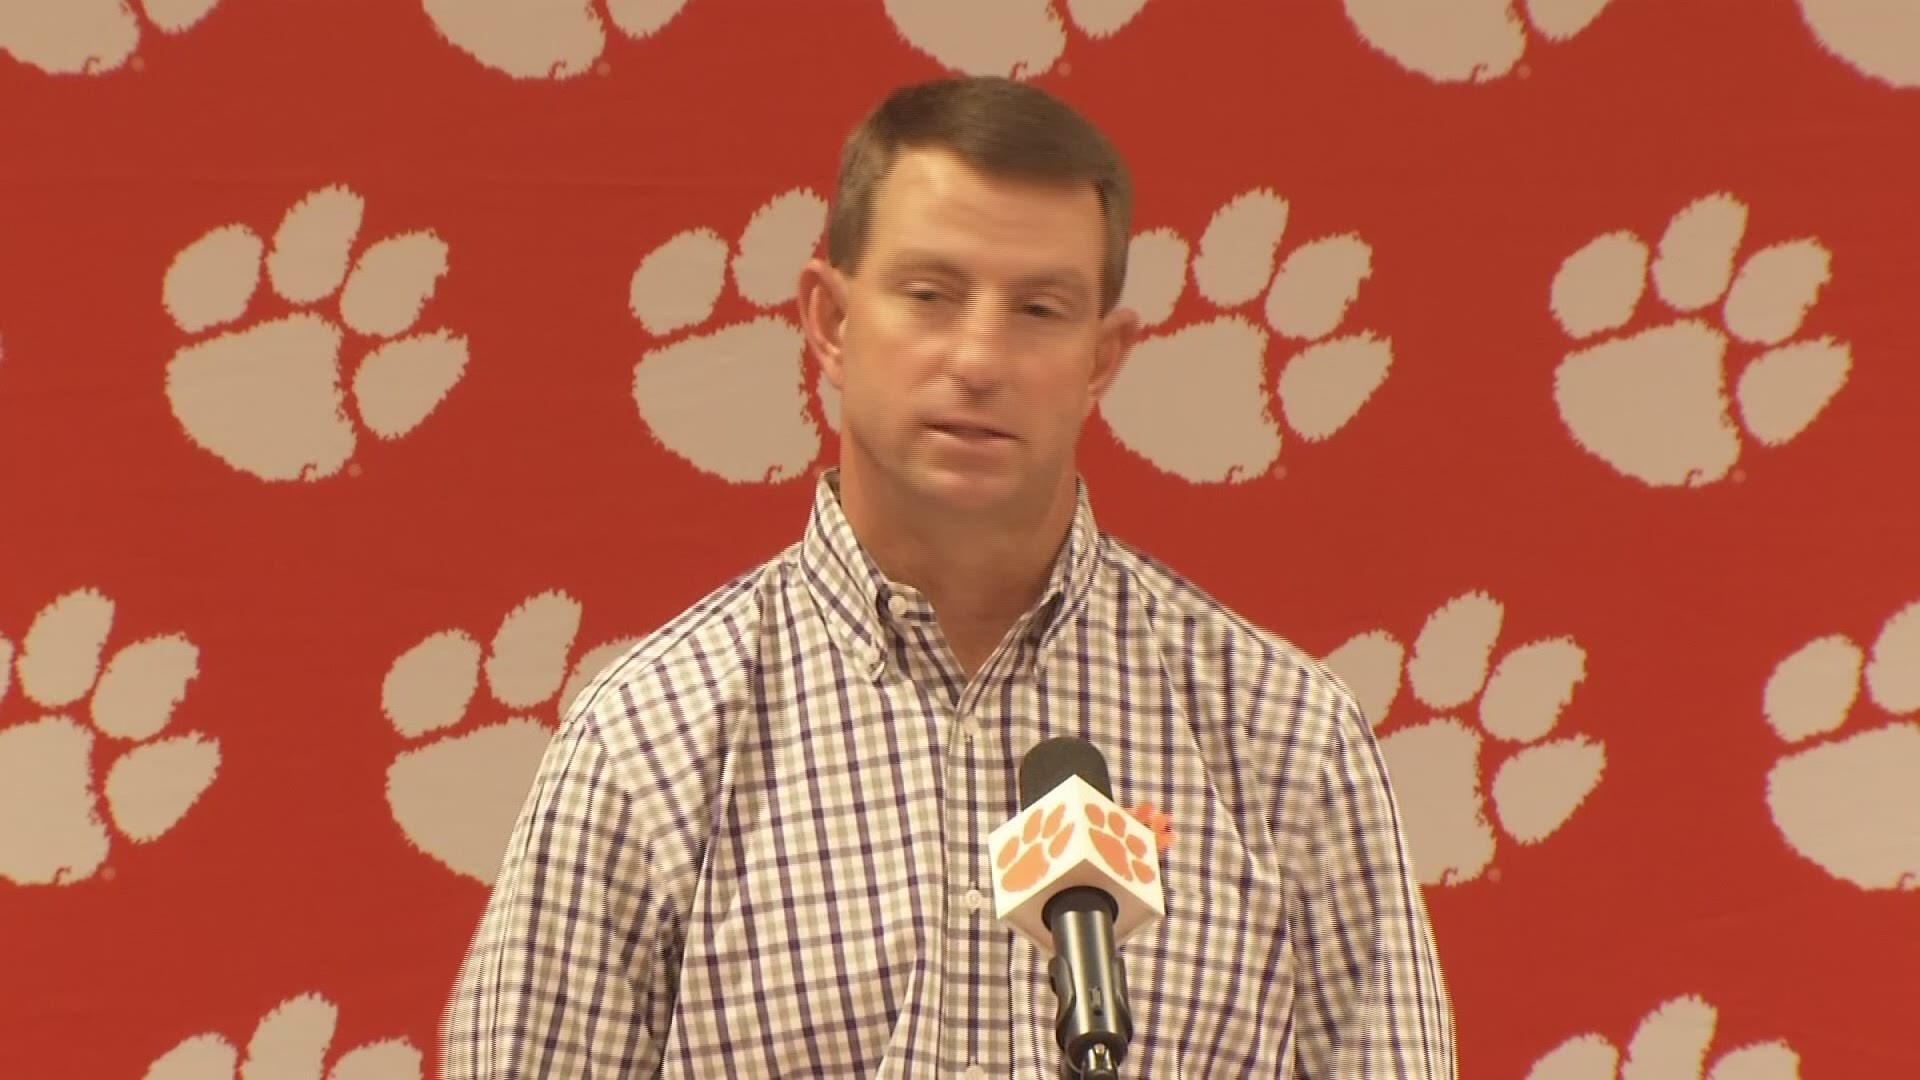 Clemson head football coach Dabo Swinney says his focus is on preparing his team for the next opponent and not on why his team has played so many early games.